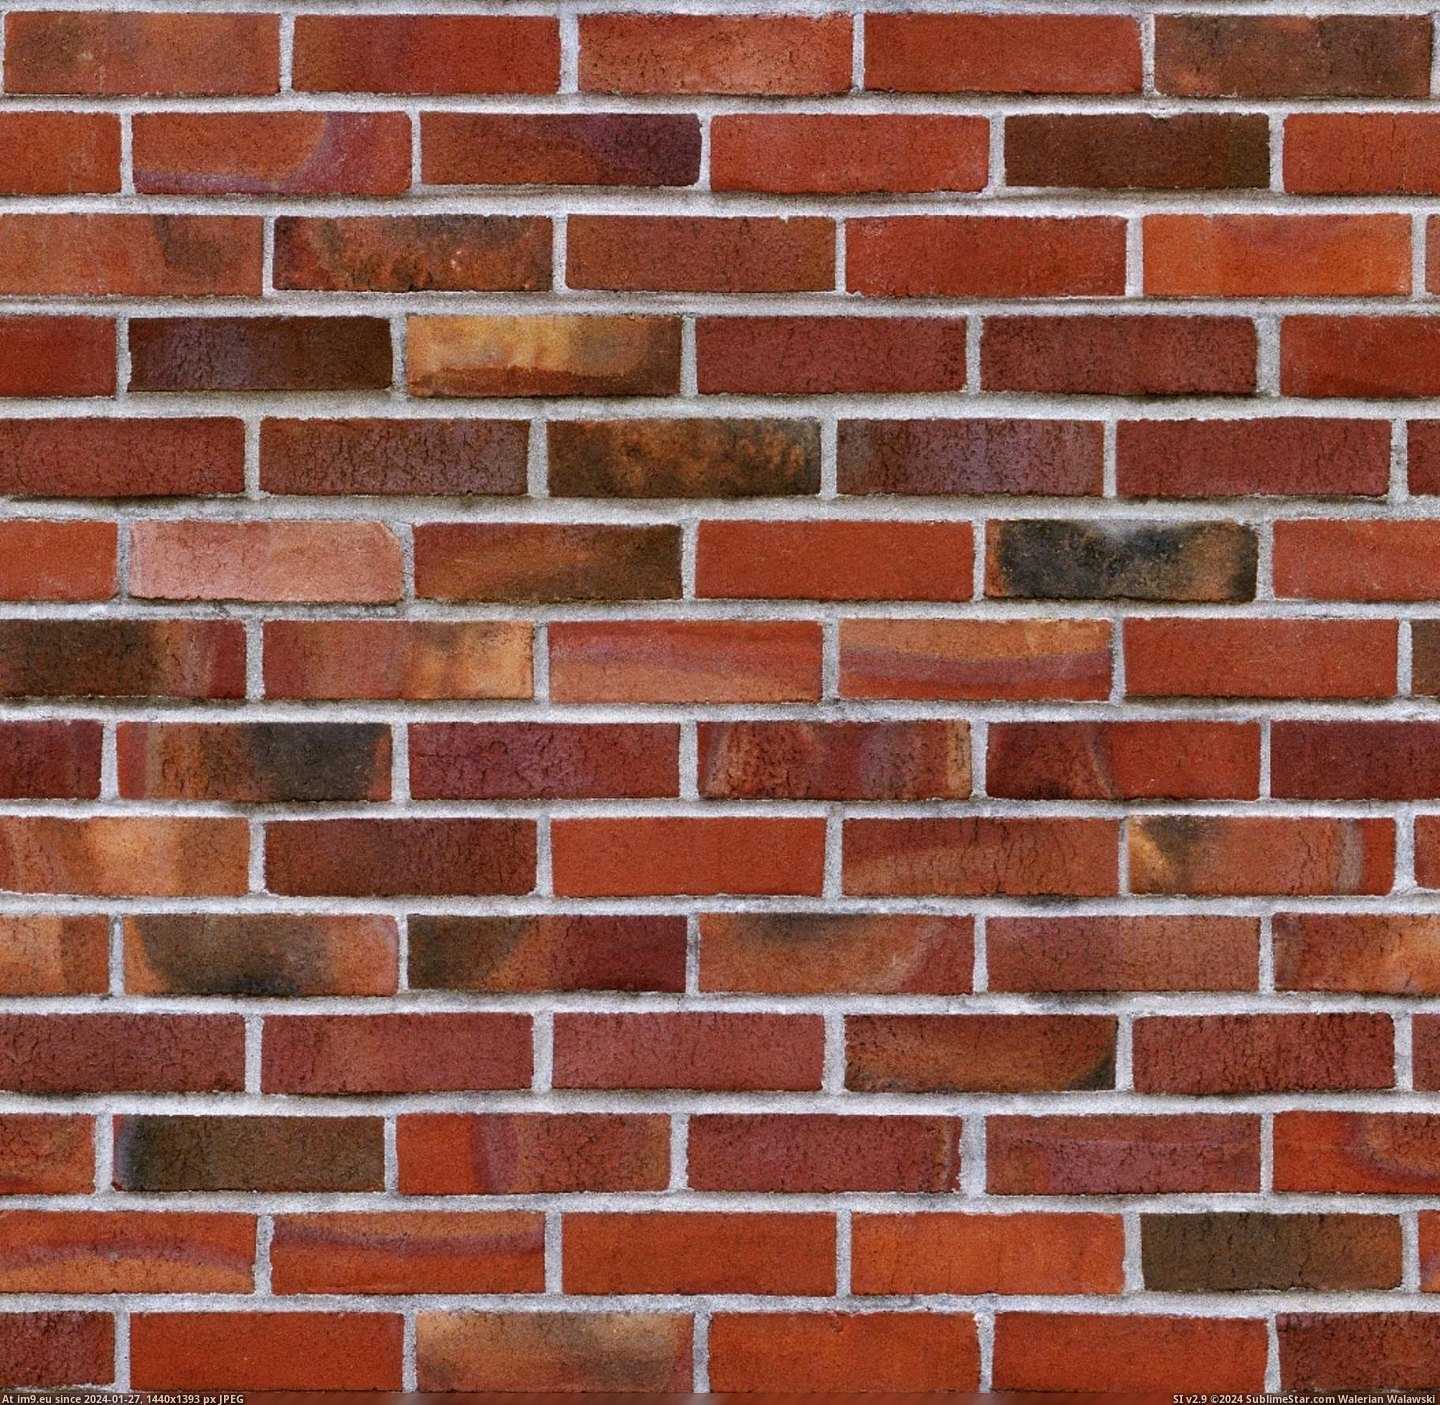 Brick wall texture 8 (in Brick walls textures and wallpapers)